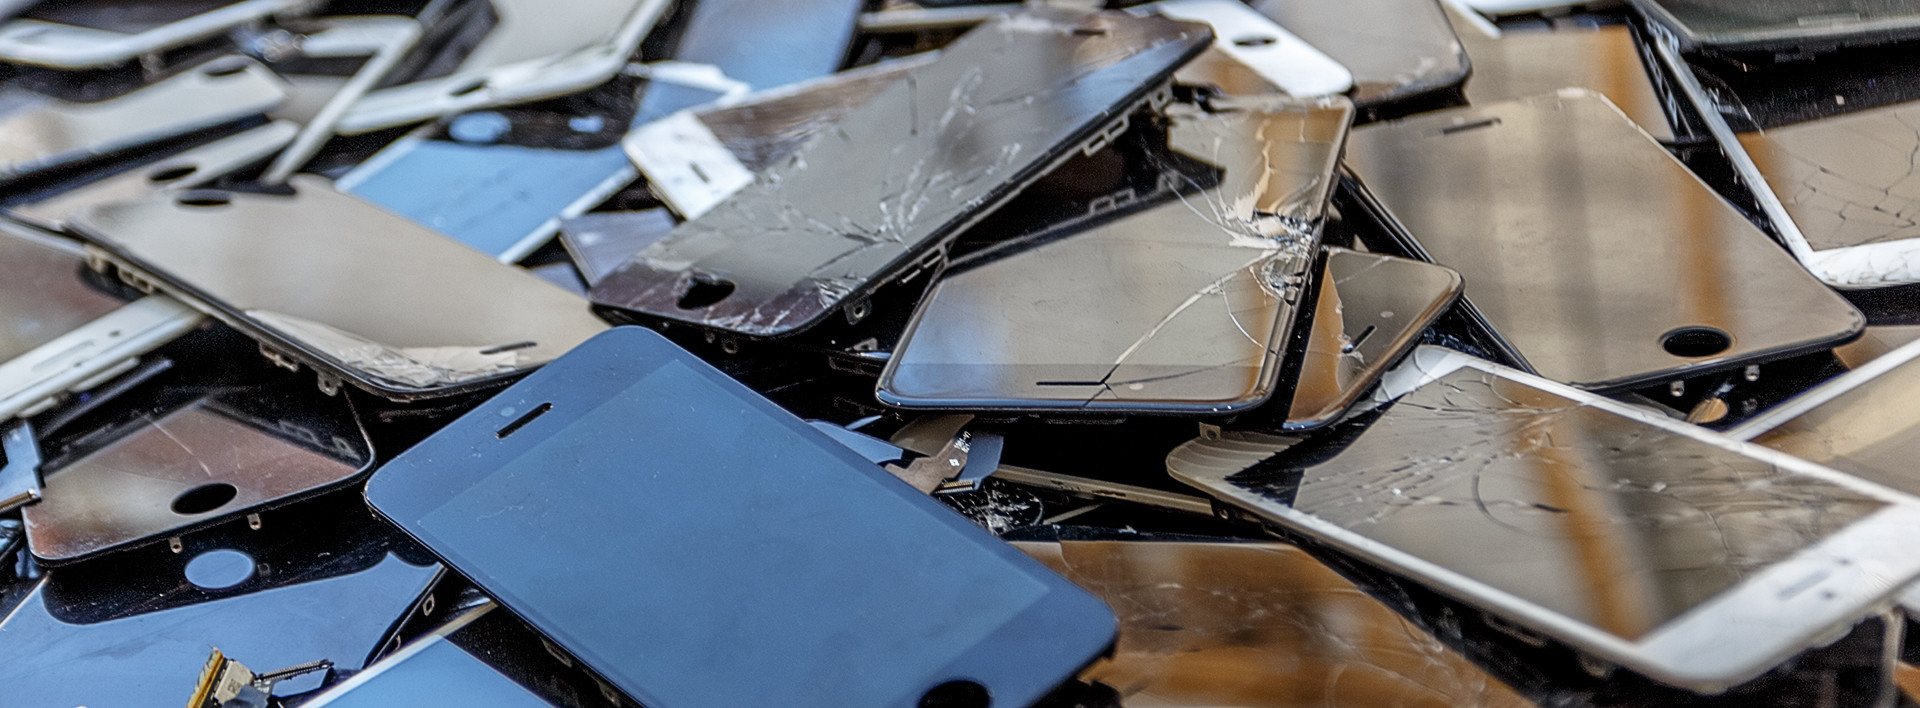 Solving the Global Problem of E-Waste